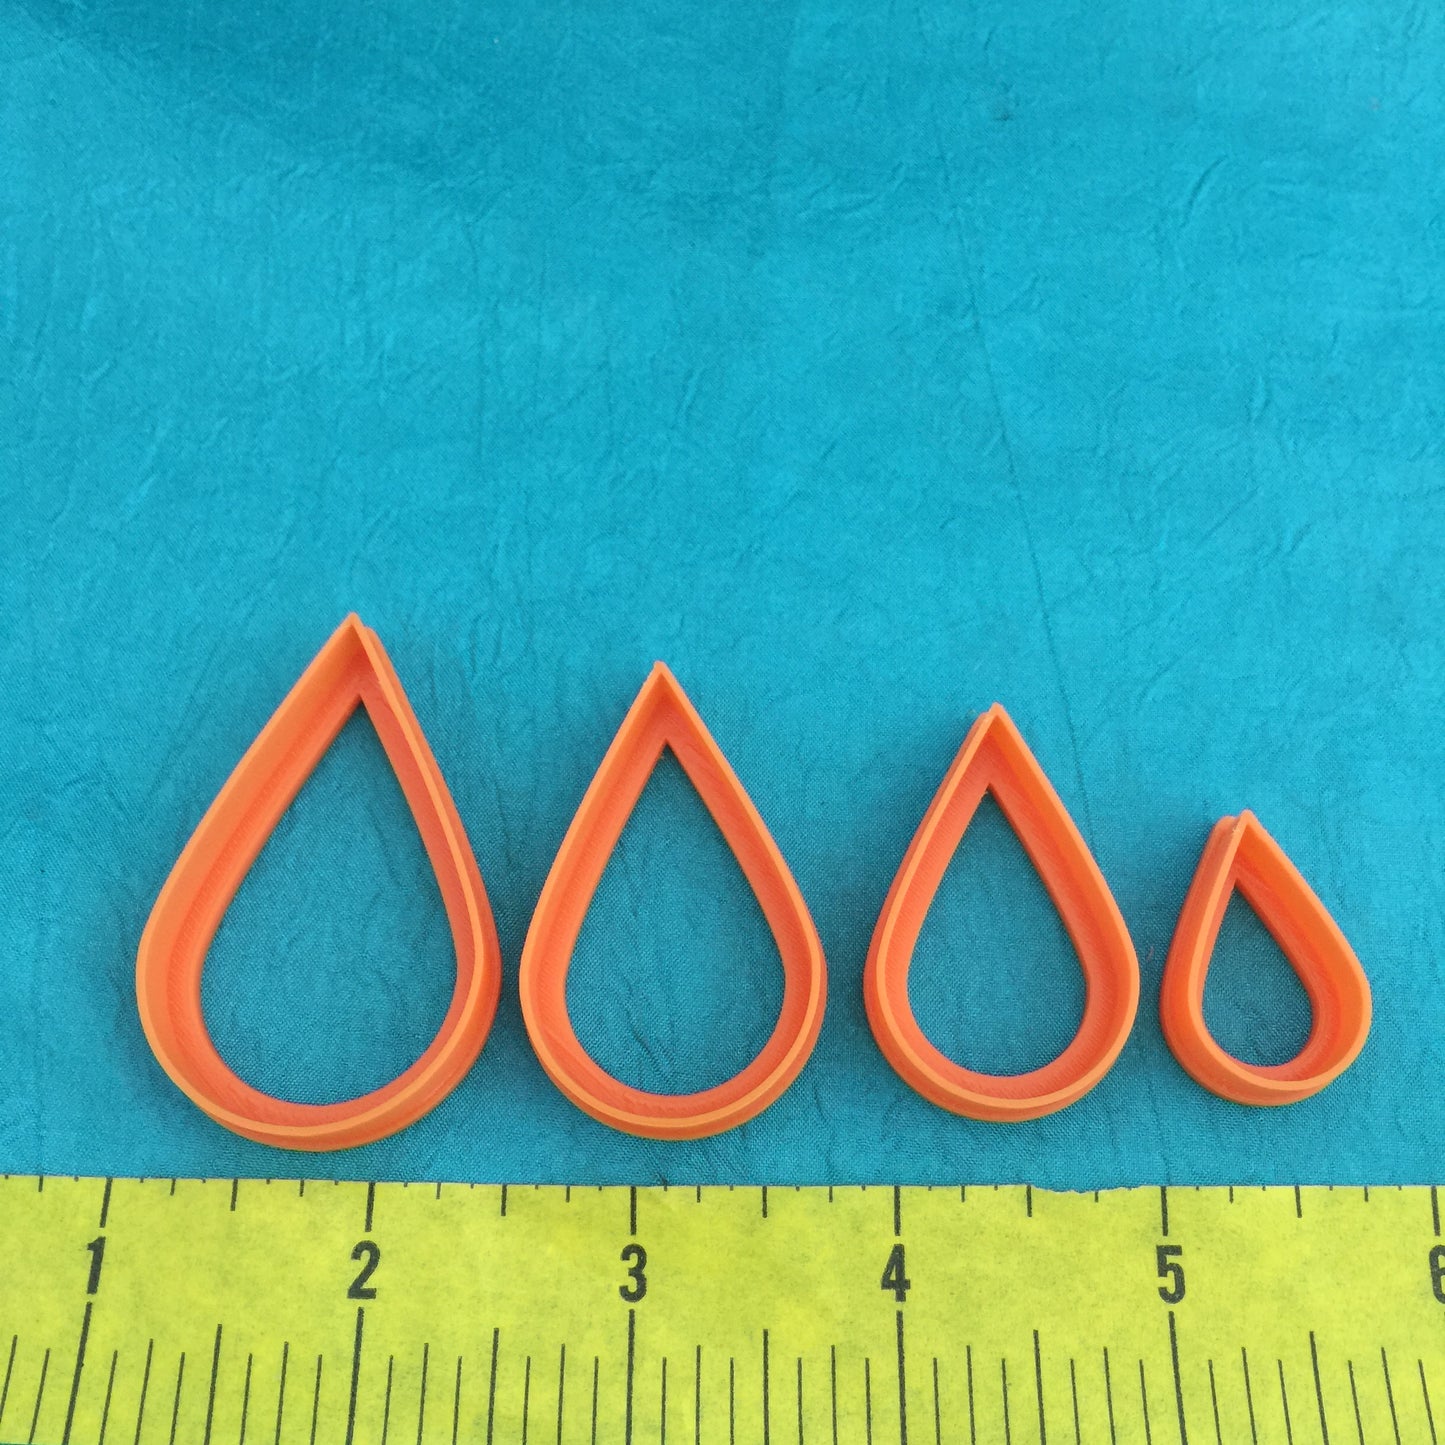 Tear Drop Rain Drop Graduated Sized Set of 4 Jewelry Sized polymer clay Cutters - Polymer Clay TV tutorial and supplies